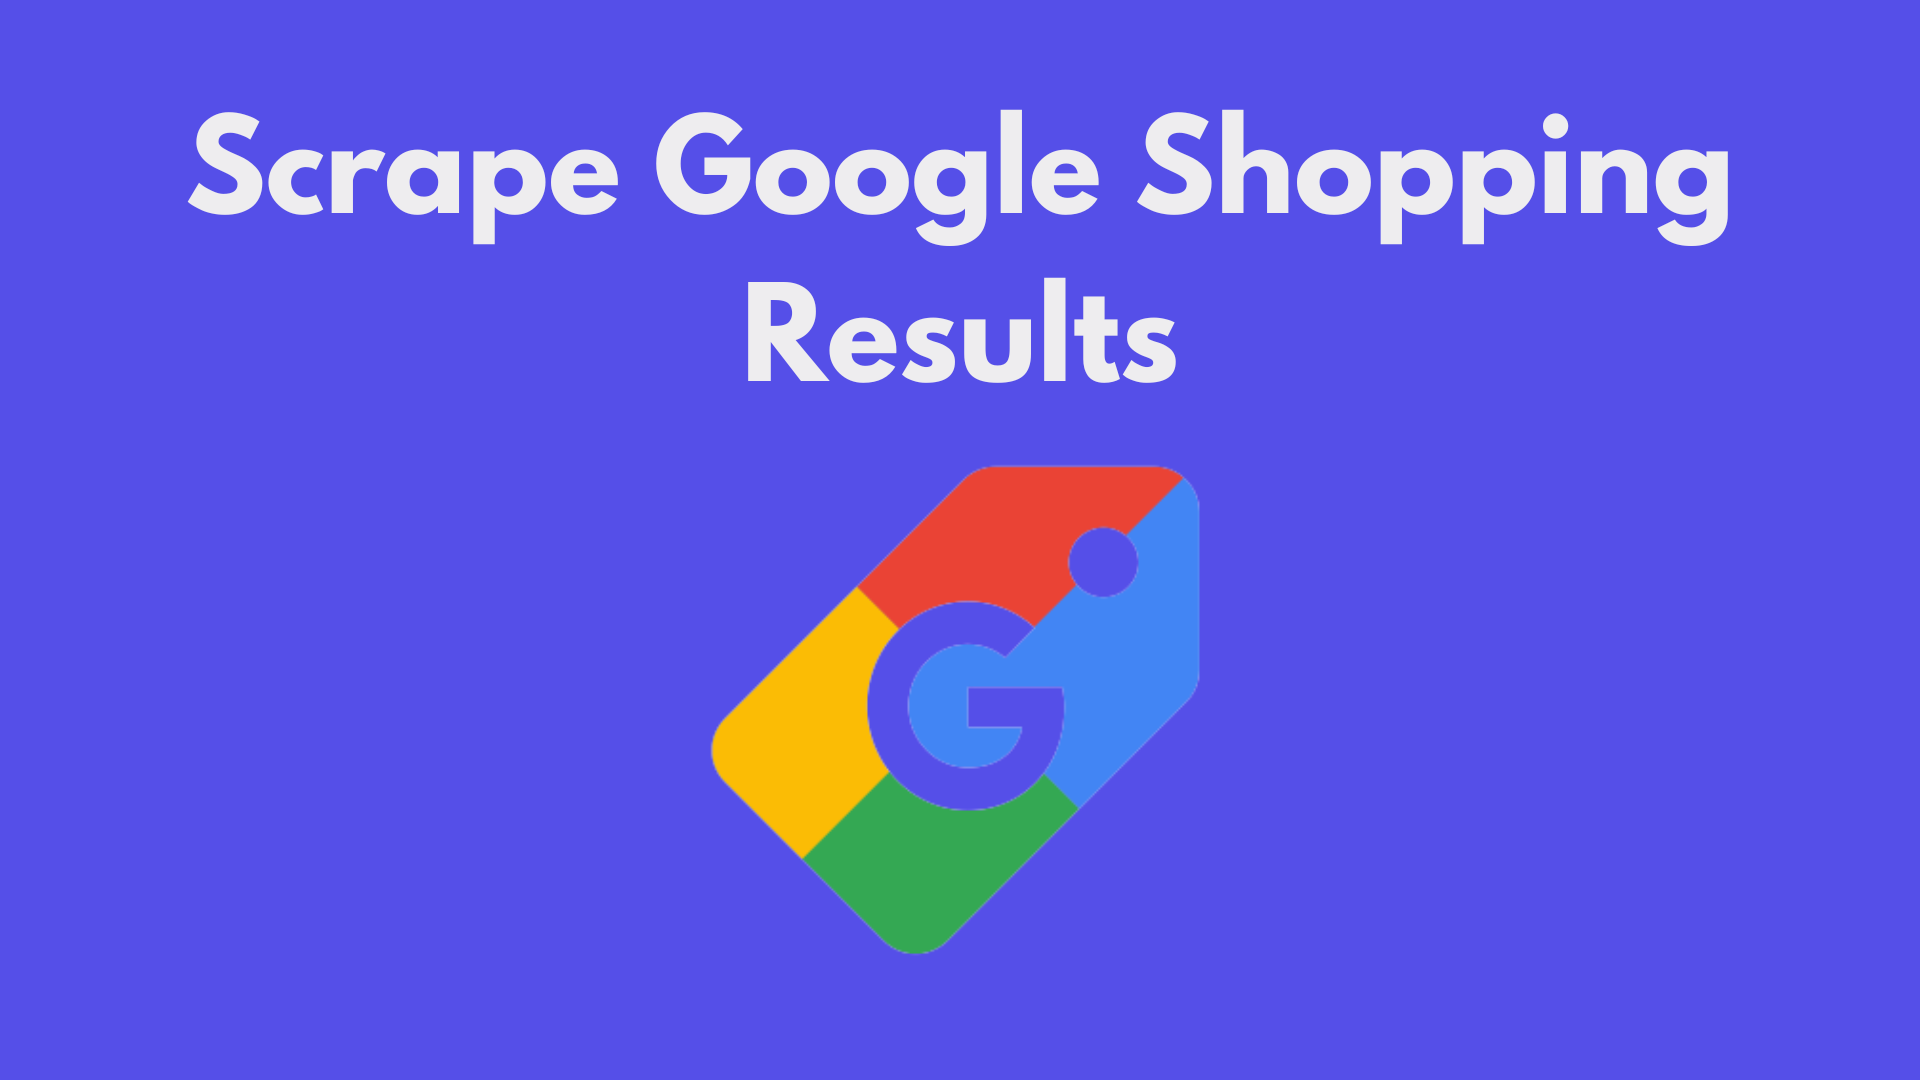 How to Scrape Google Shopping Results